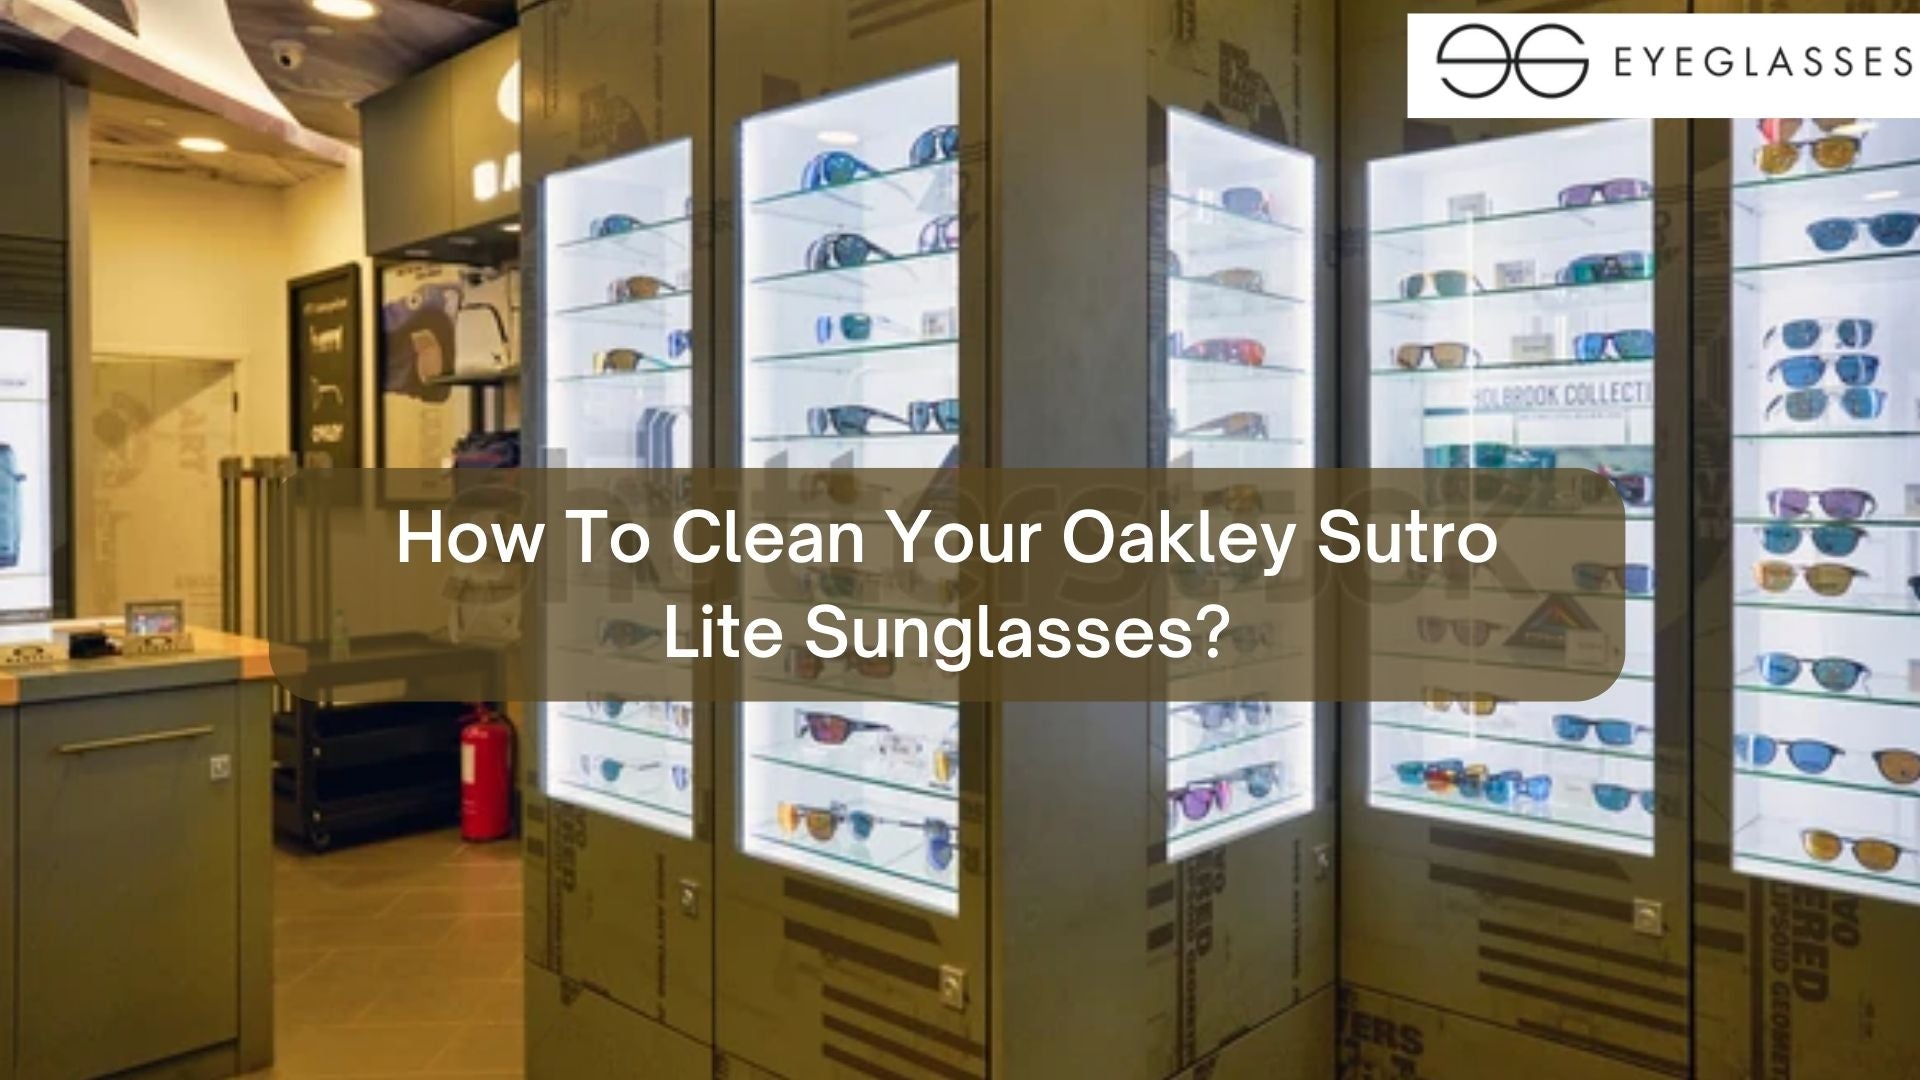 How To Clean Your Oakley Sutro Lite Sunglasses?